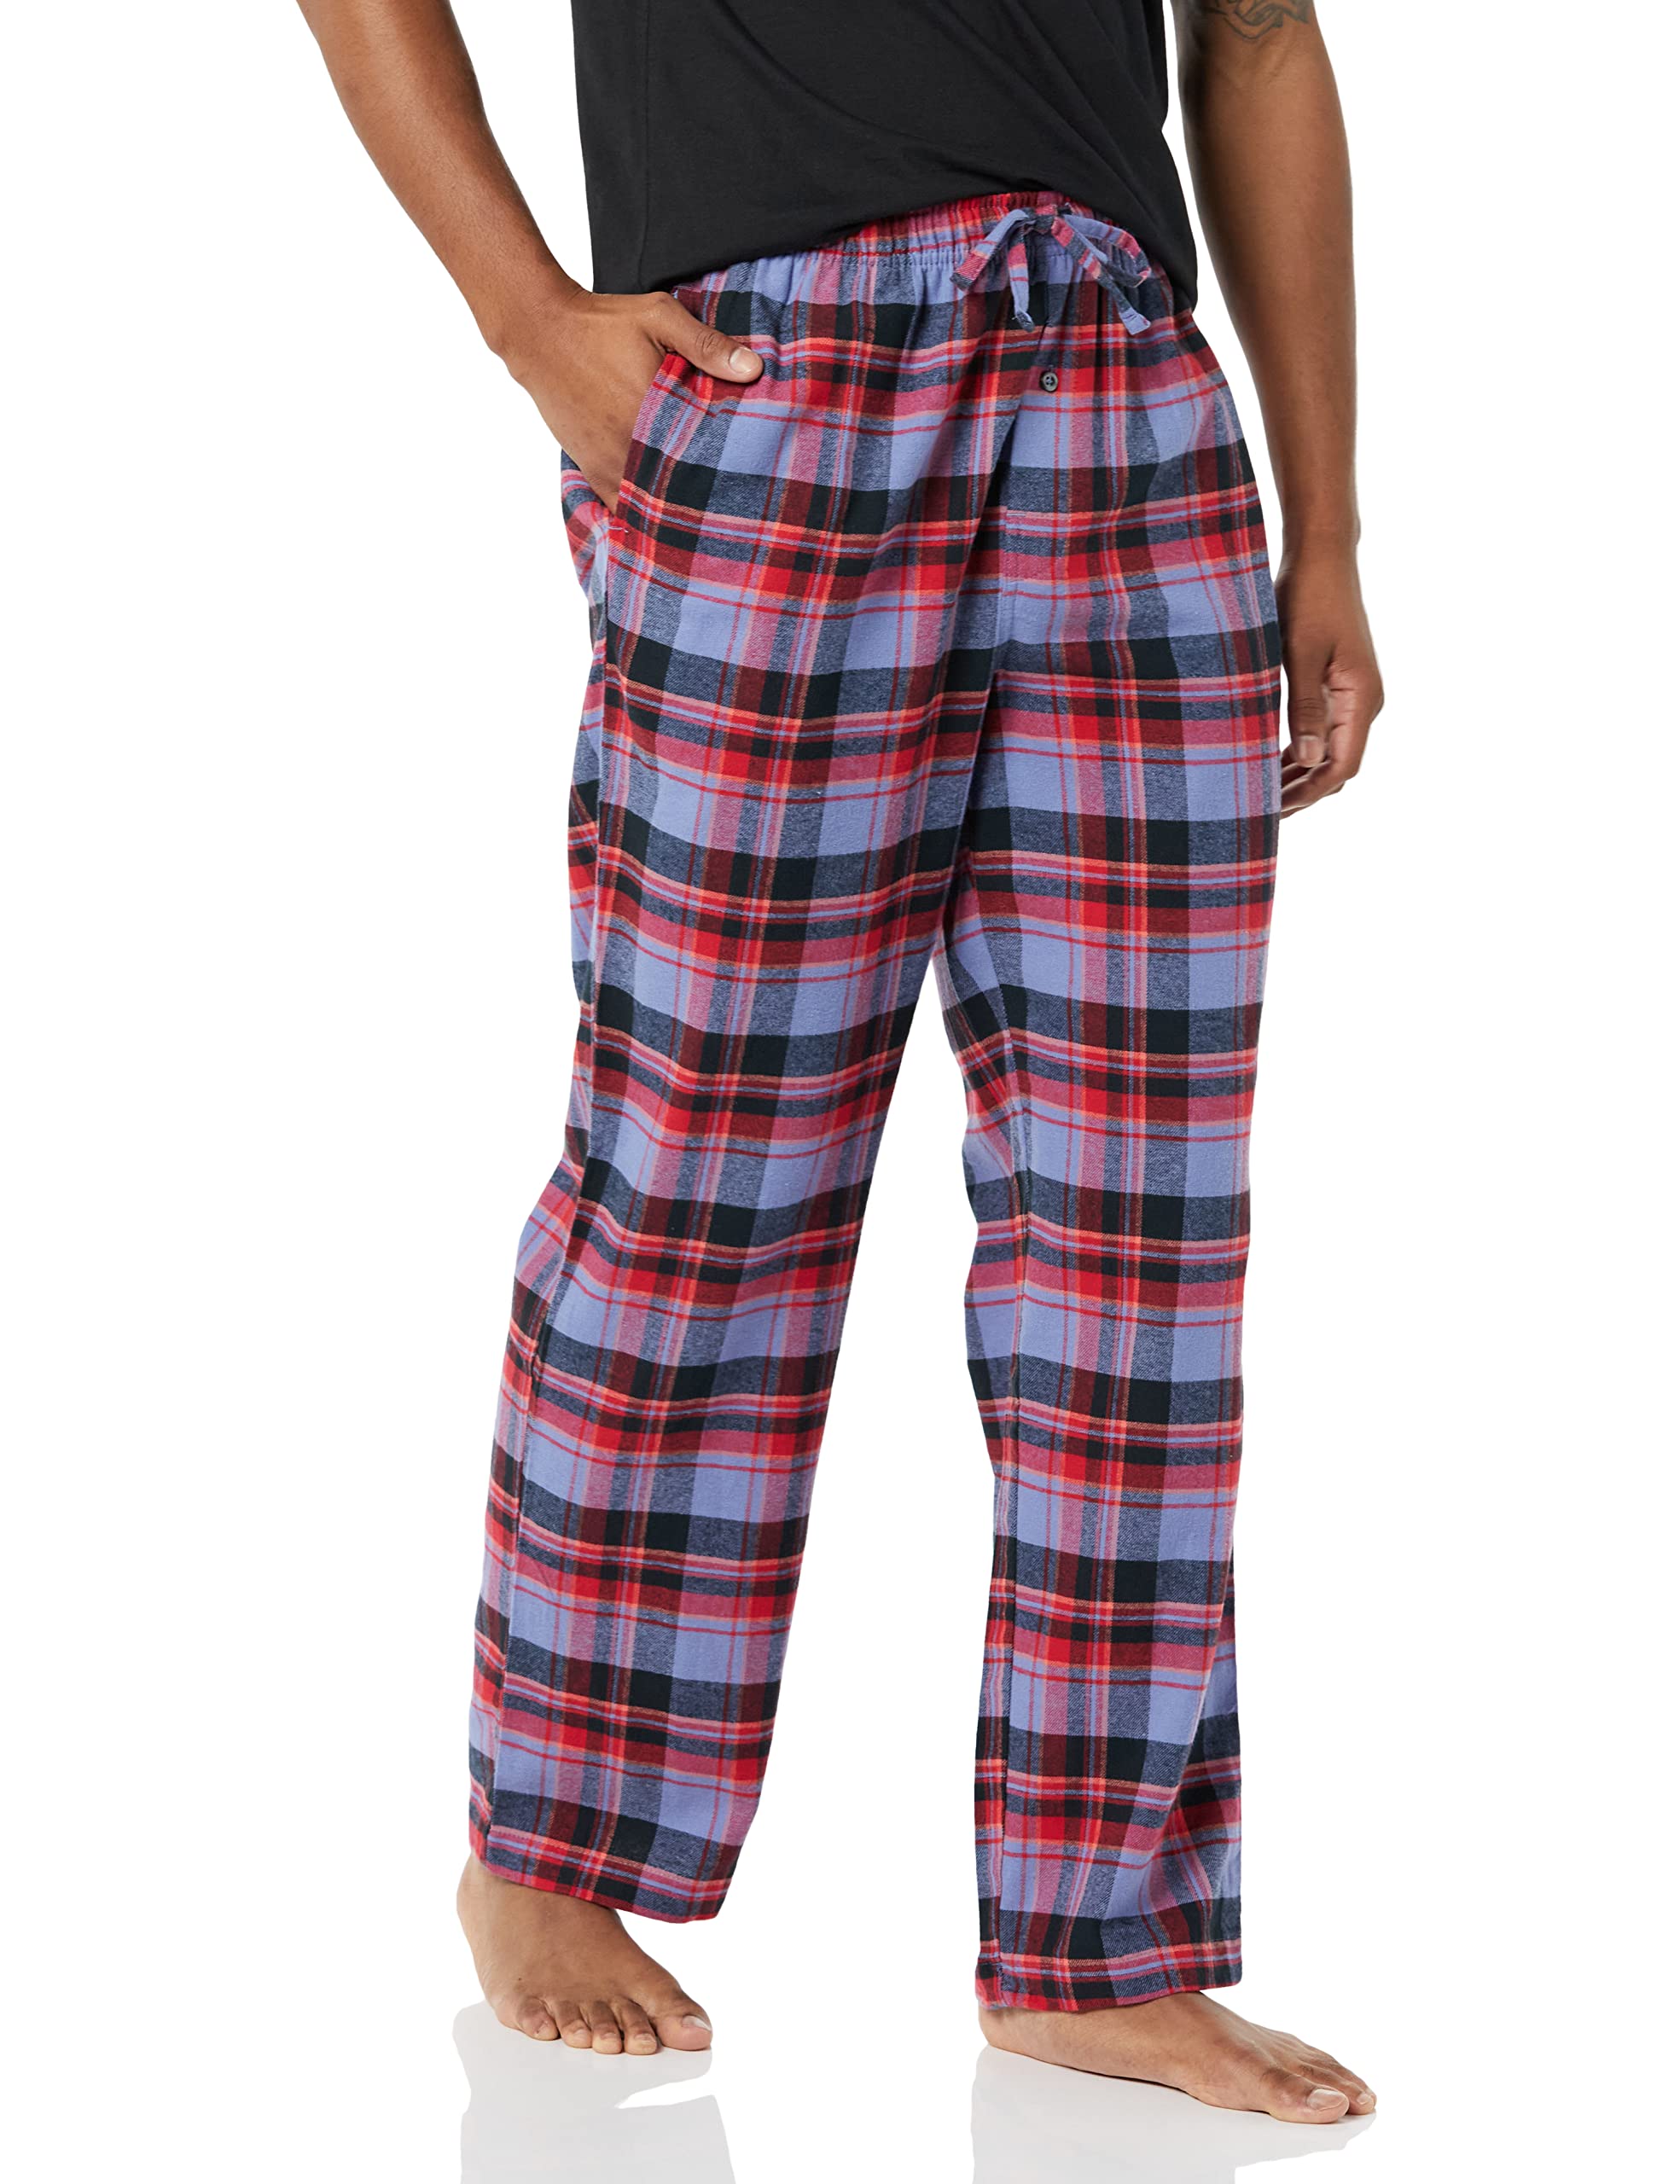 Amazon Essentials Men's 100% Cotton Flannel Pajama Pant (Various colors & Sizes) $7.10 + Free Shipping w/ Prime or on $35+